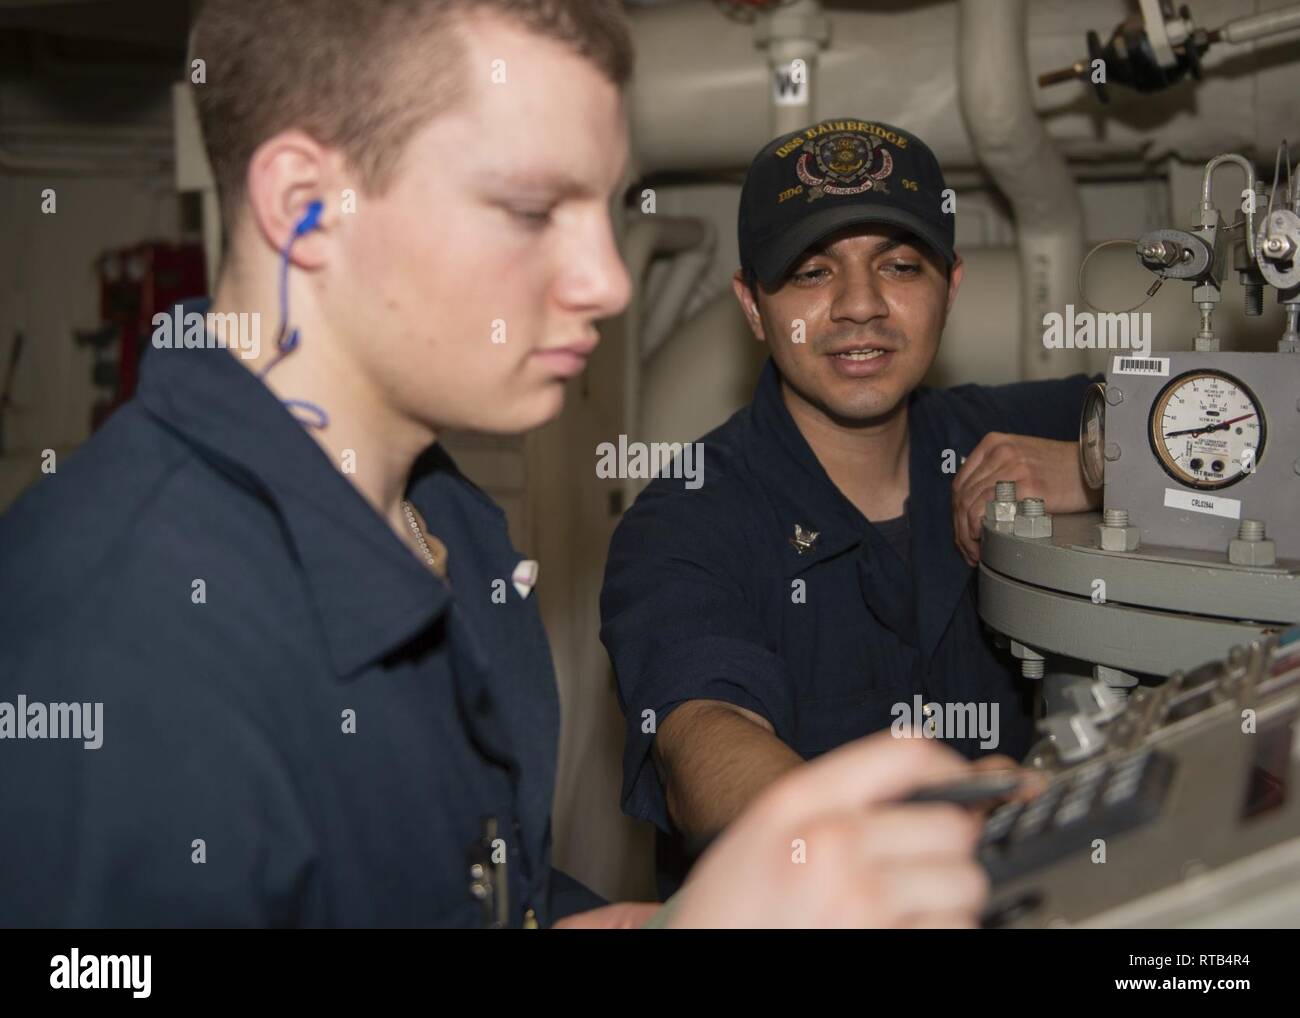 ATLANTIC OCEAN (Feb. 6, 2019) Gas Turbine Systems Technician (Mechanical) 2nd Class Caesar Garcia (right), from San Diego, Calif., provides training to Gas Turbine Systems Technician Fireman Jaxson Connell, from Bountiful, Utah, on how to operate a low-pressure air compressor (LPAC) in main engine room (MER) 1 aboard the Arleigh Burke-class guided-missile destroyer USS Bainbridge (DDG 96) during composite training unit exercise (COMPTUEX), Feb. 6. Bainbridge is currently underway conducting COMPTUEX with Carrier Strike Group (CSG) 12. The components of CSG 12 embody a “team-of-teams” concept,  Stock Photo